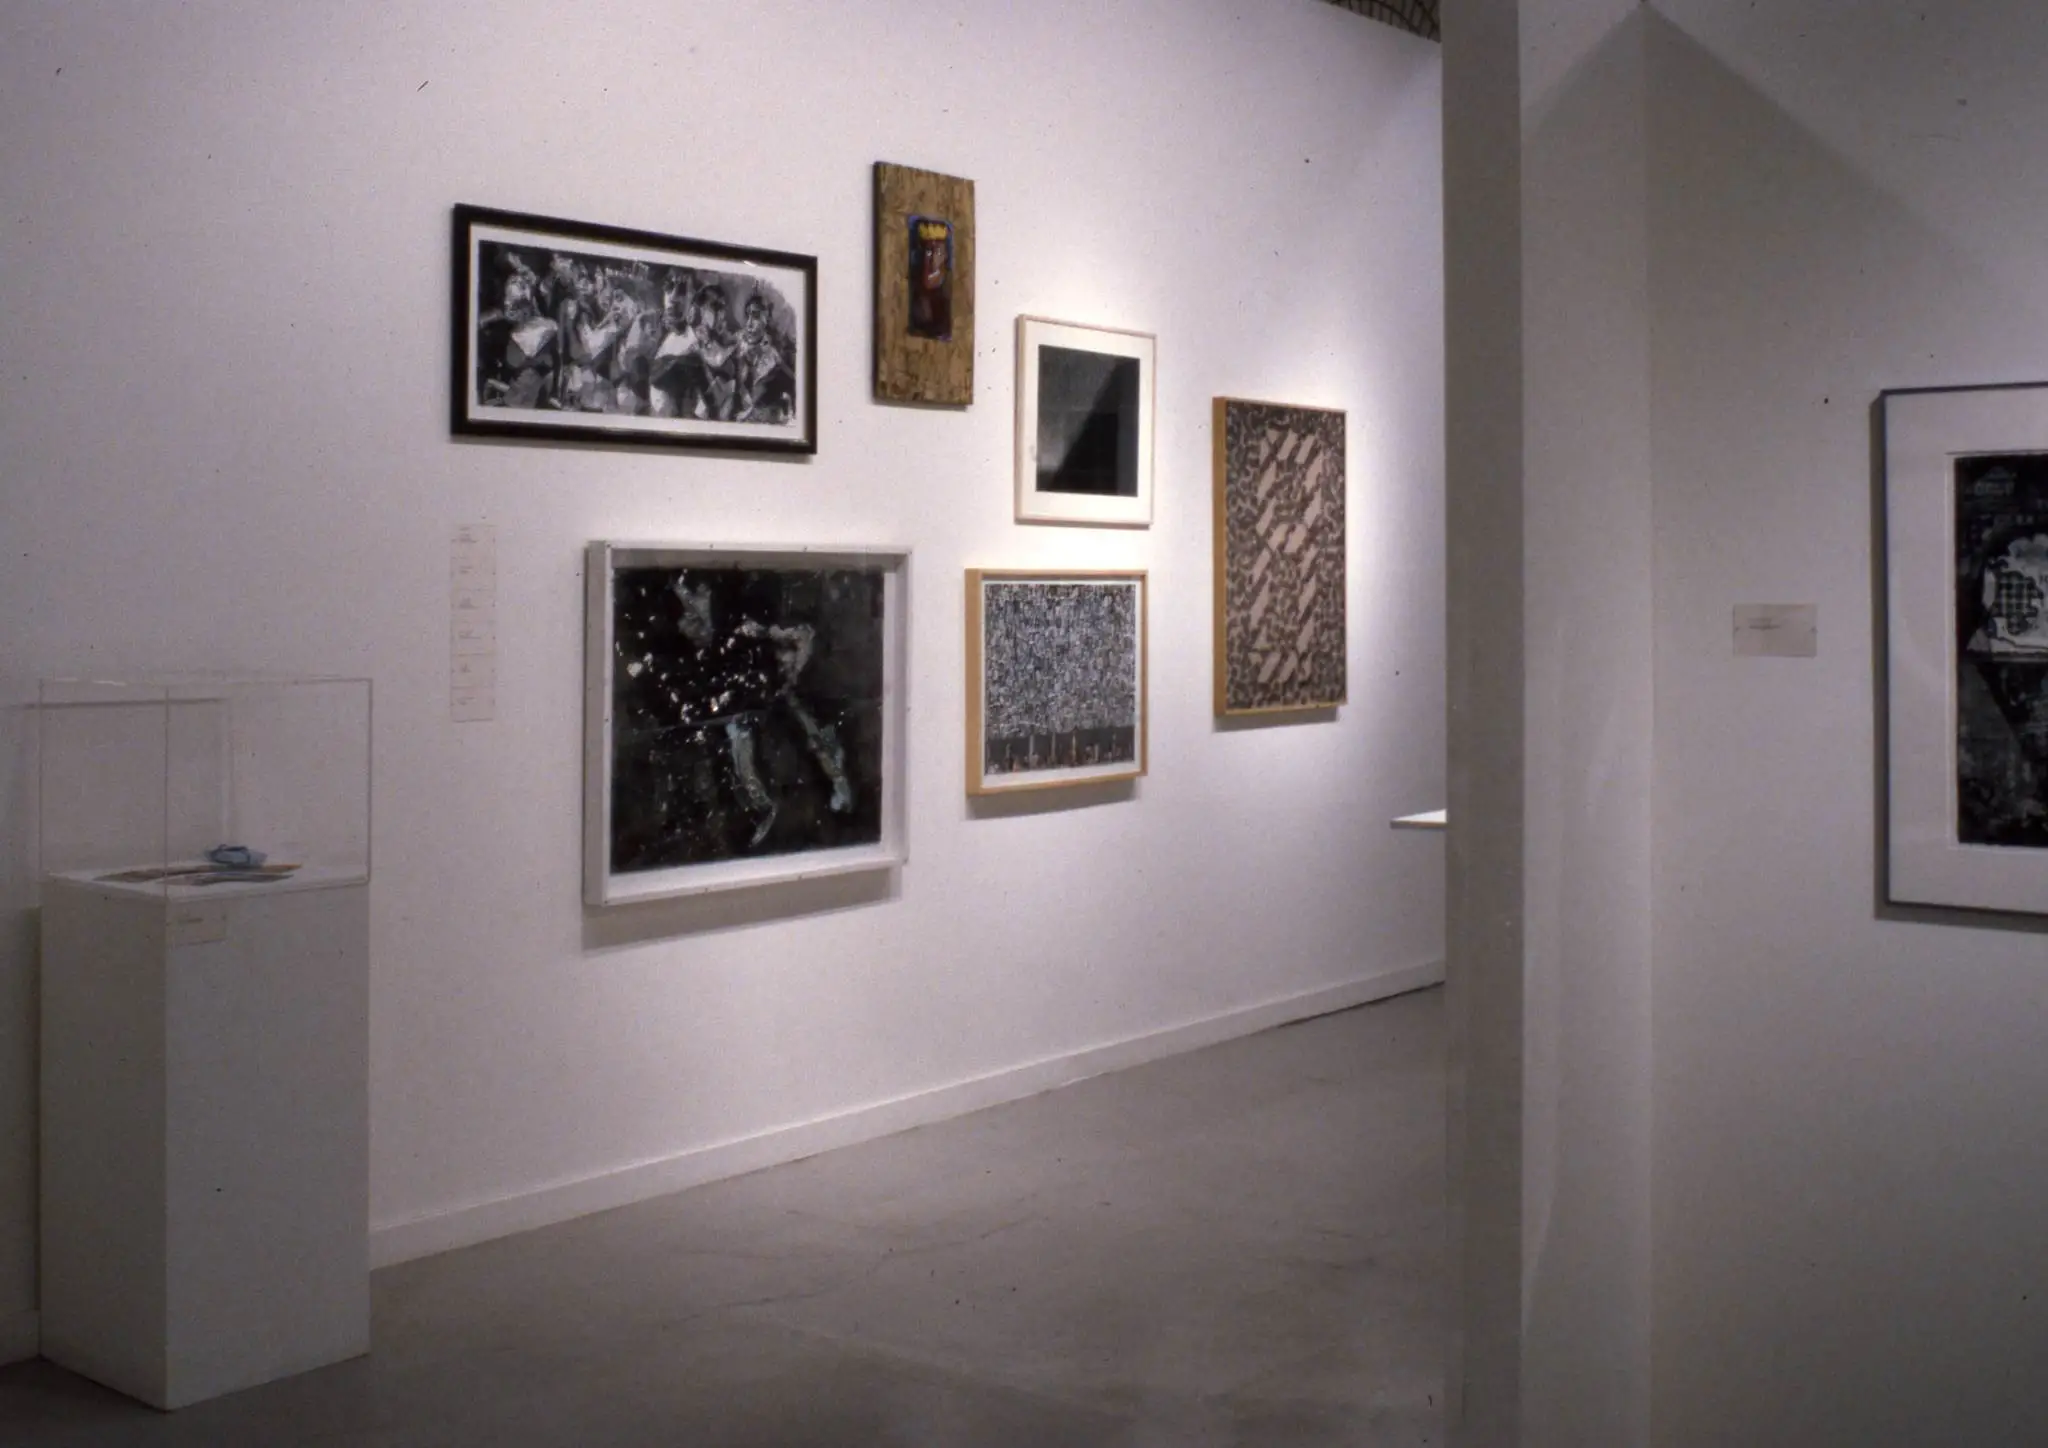 A white room gallery showing different artworks on the wall